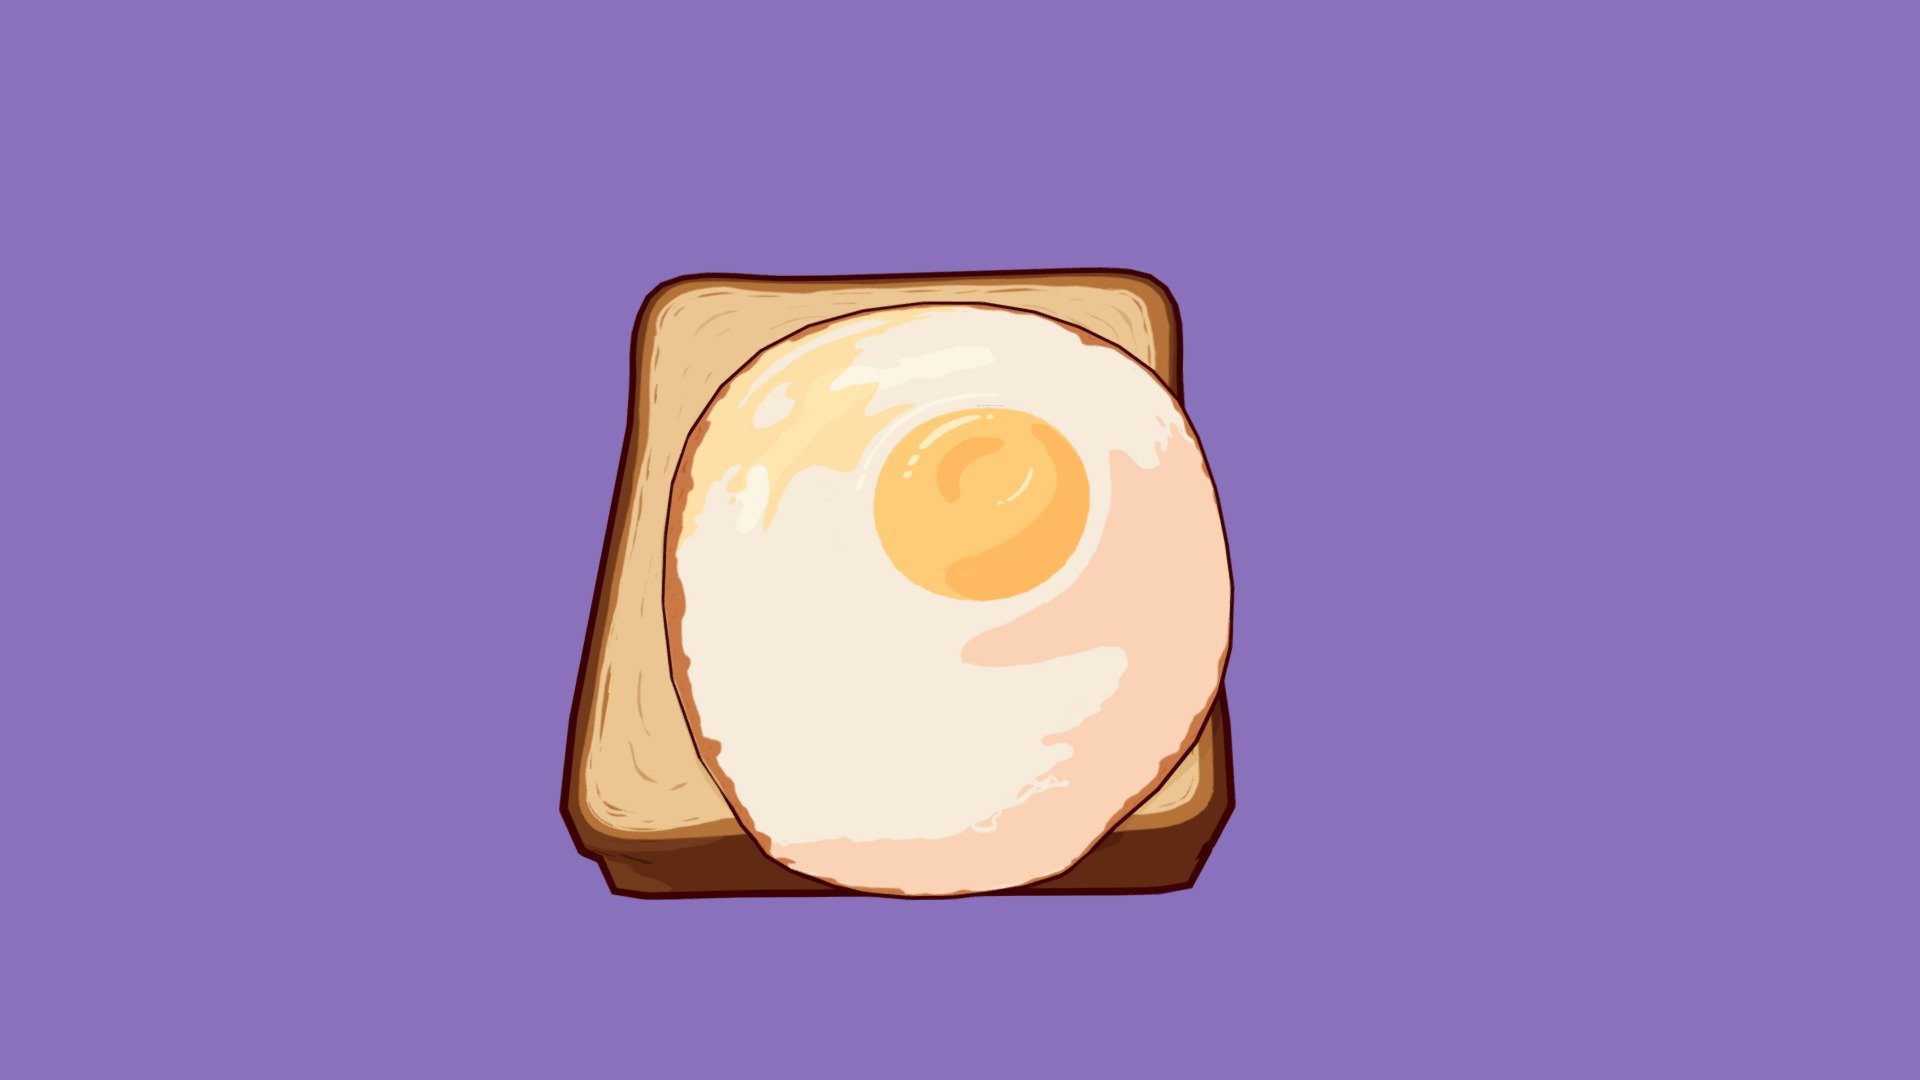 styelized cartoon egg on toast .
inspired by the Ghibli movie Castle in the Sky 3d model